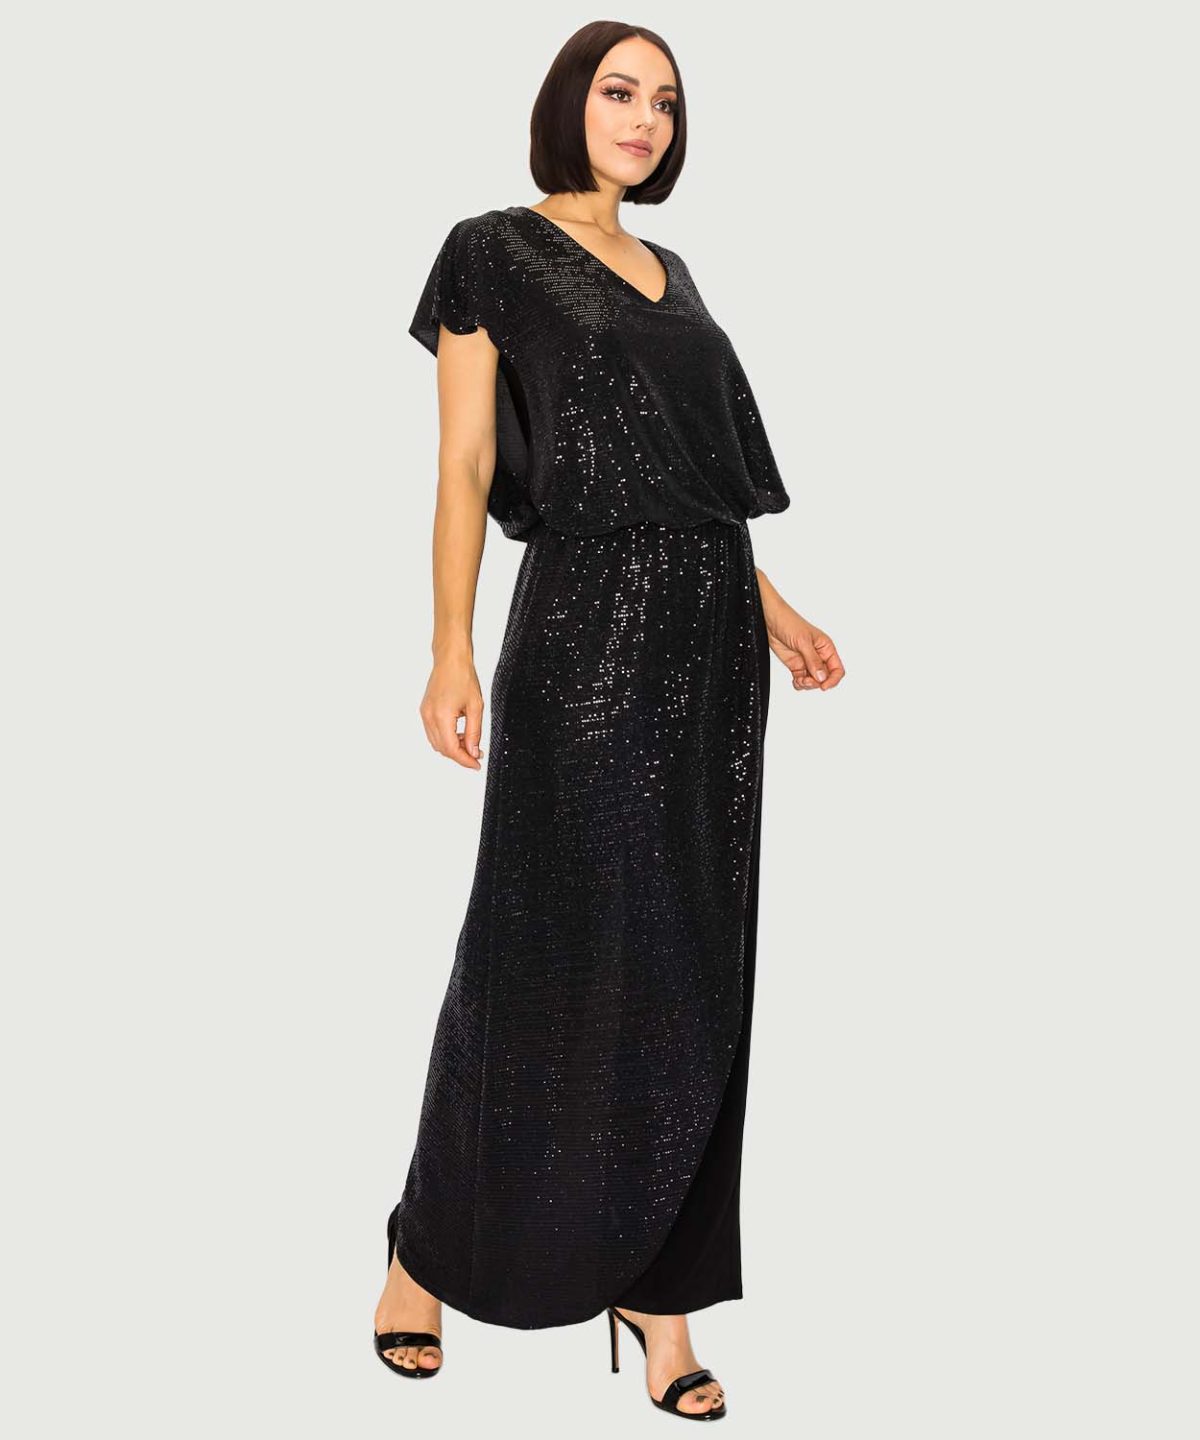 Last Tango MS1059A-SA Black V Neck Jumpsuit with Sparkle Overlay | Ooh Ooh Shoes clothing and shoe boutique located in Naples and Mashpee